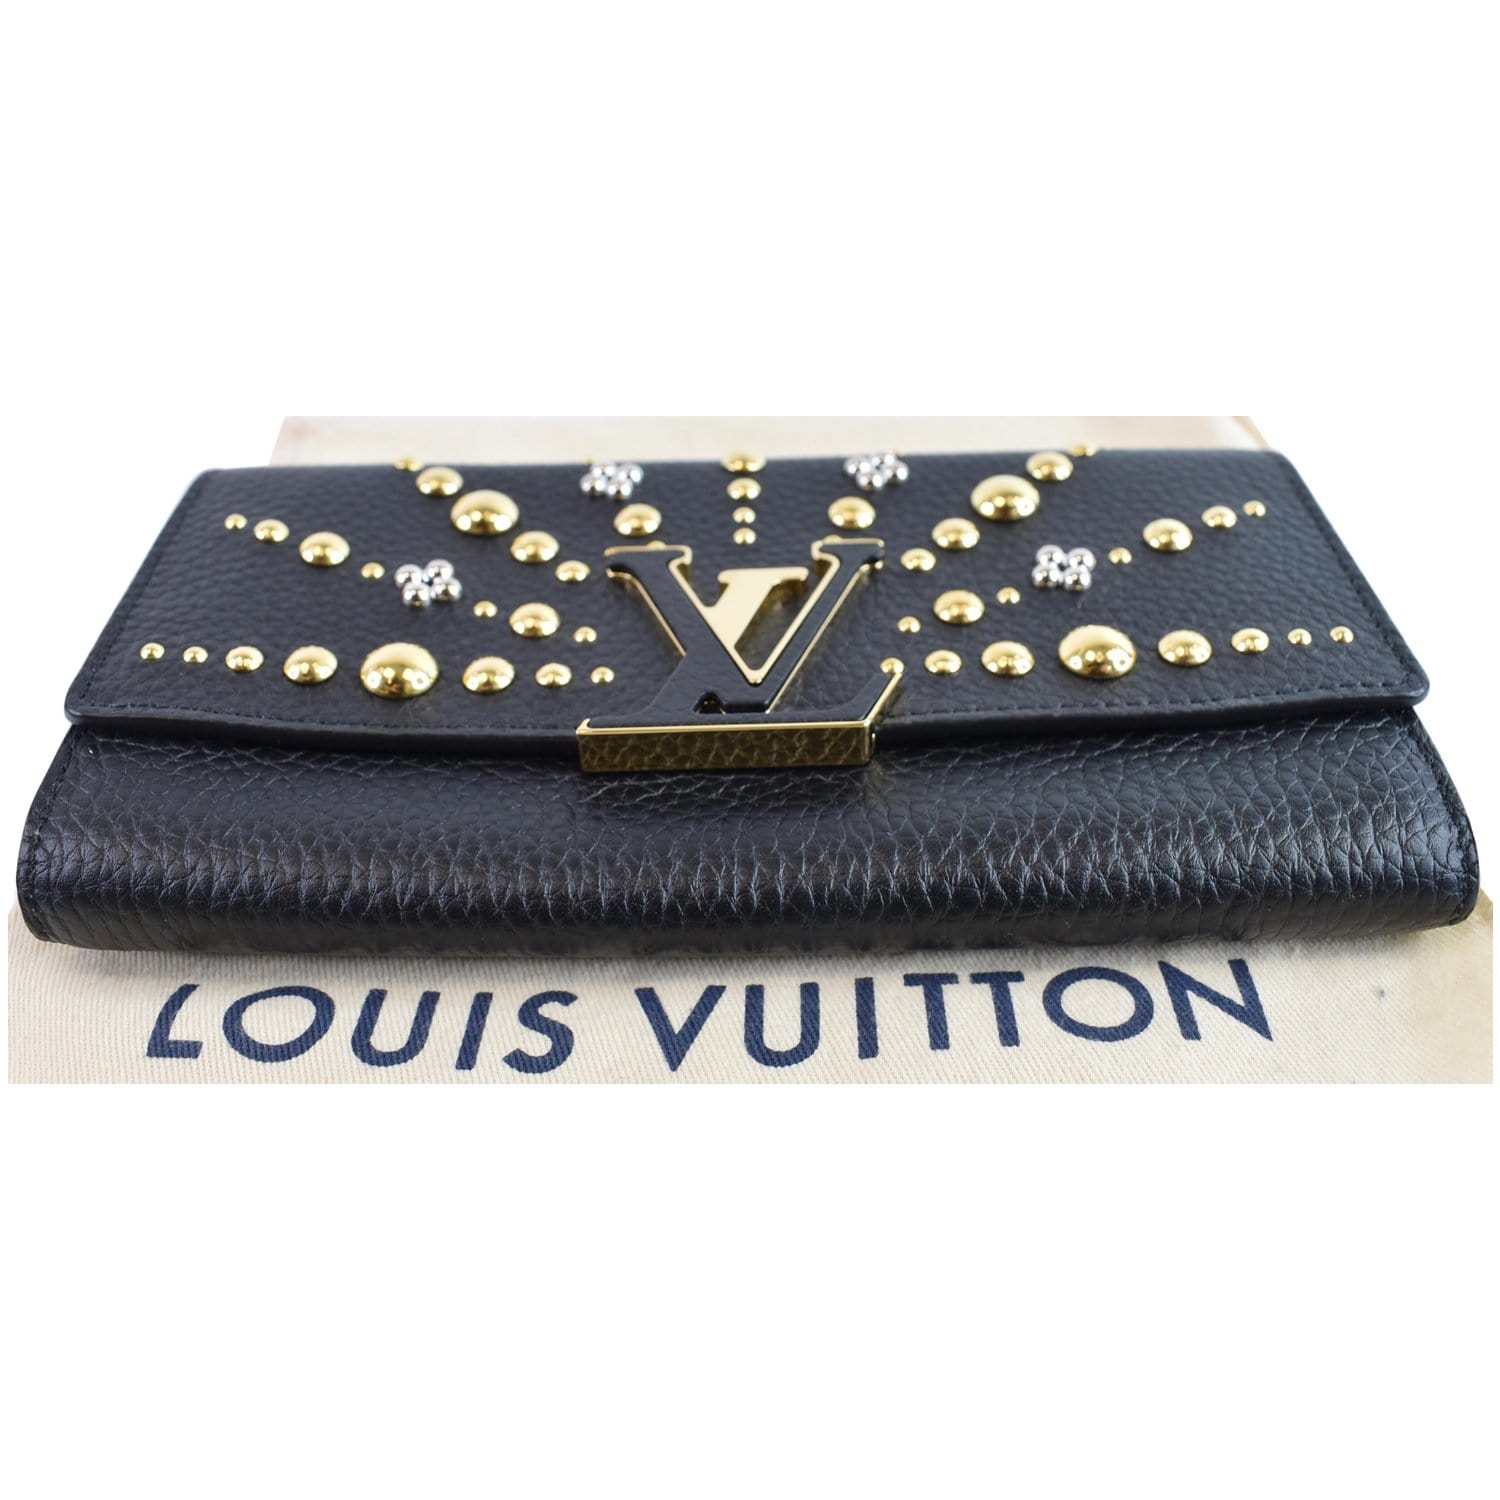 Louis Vuitton - Authenticated Capucines Wallet - Leather Beige Plain for Women, Very Good Condition